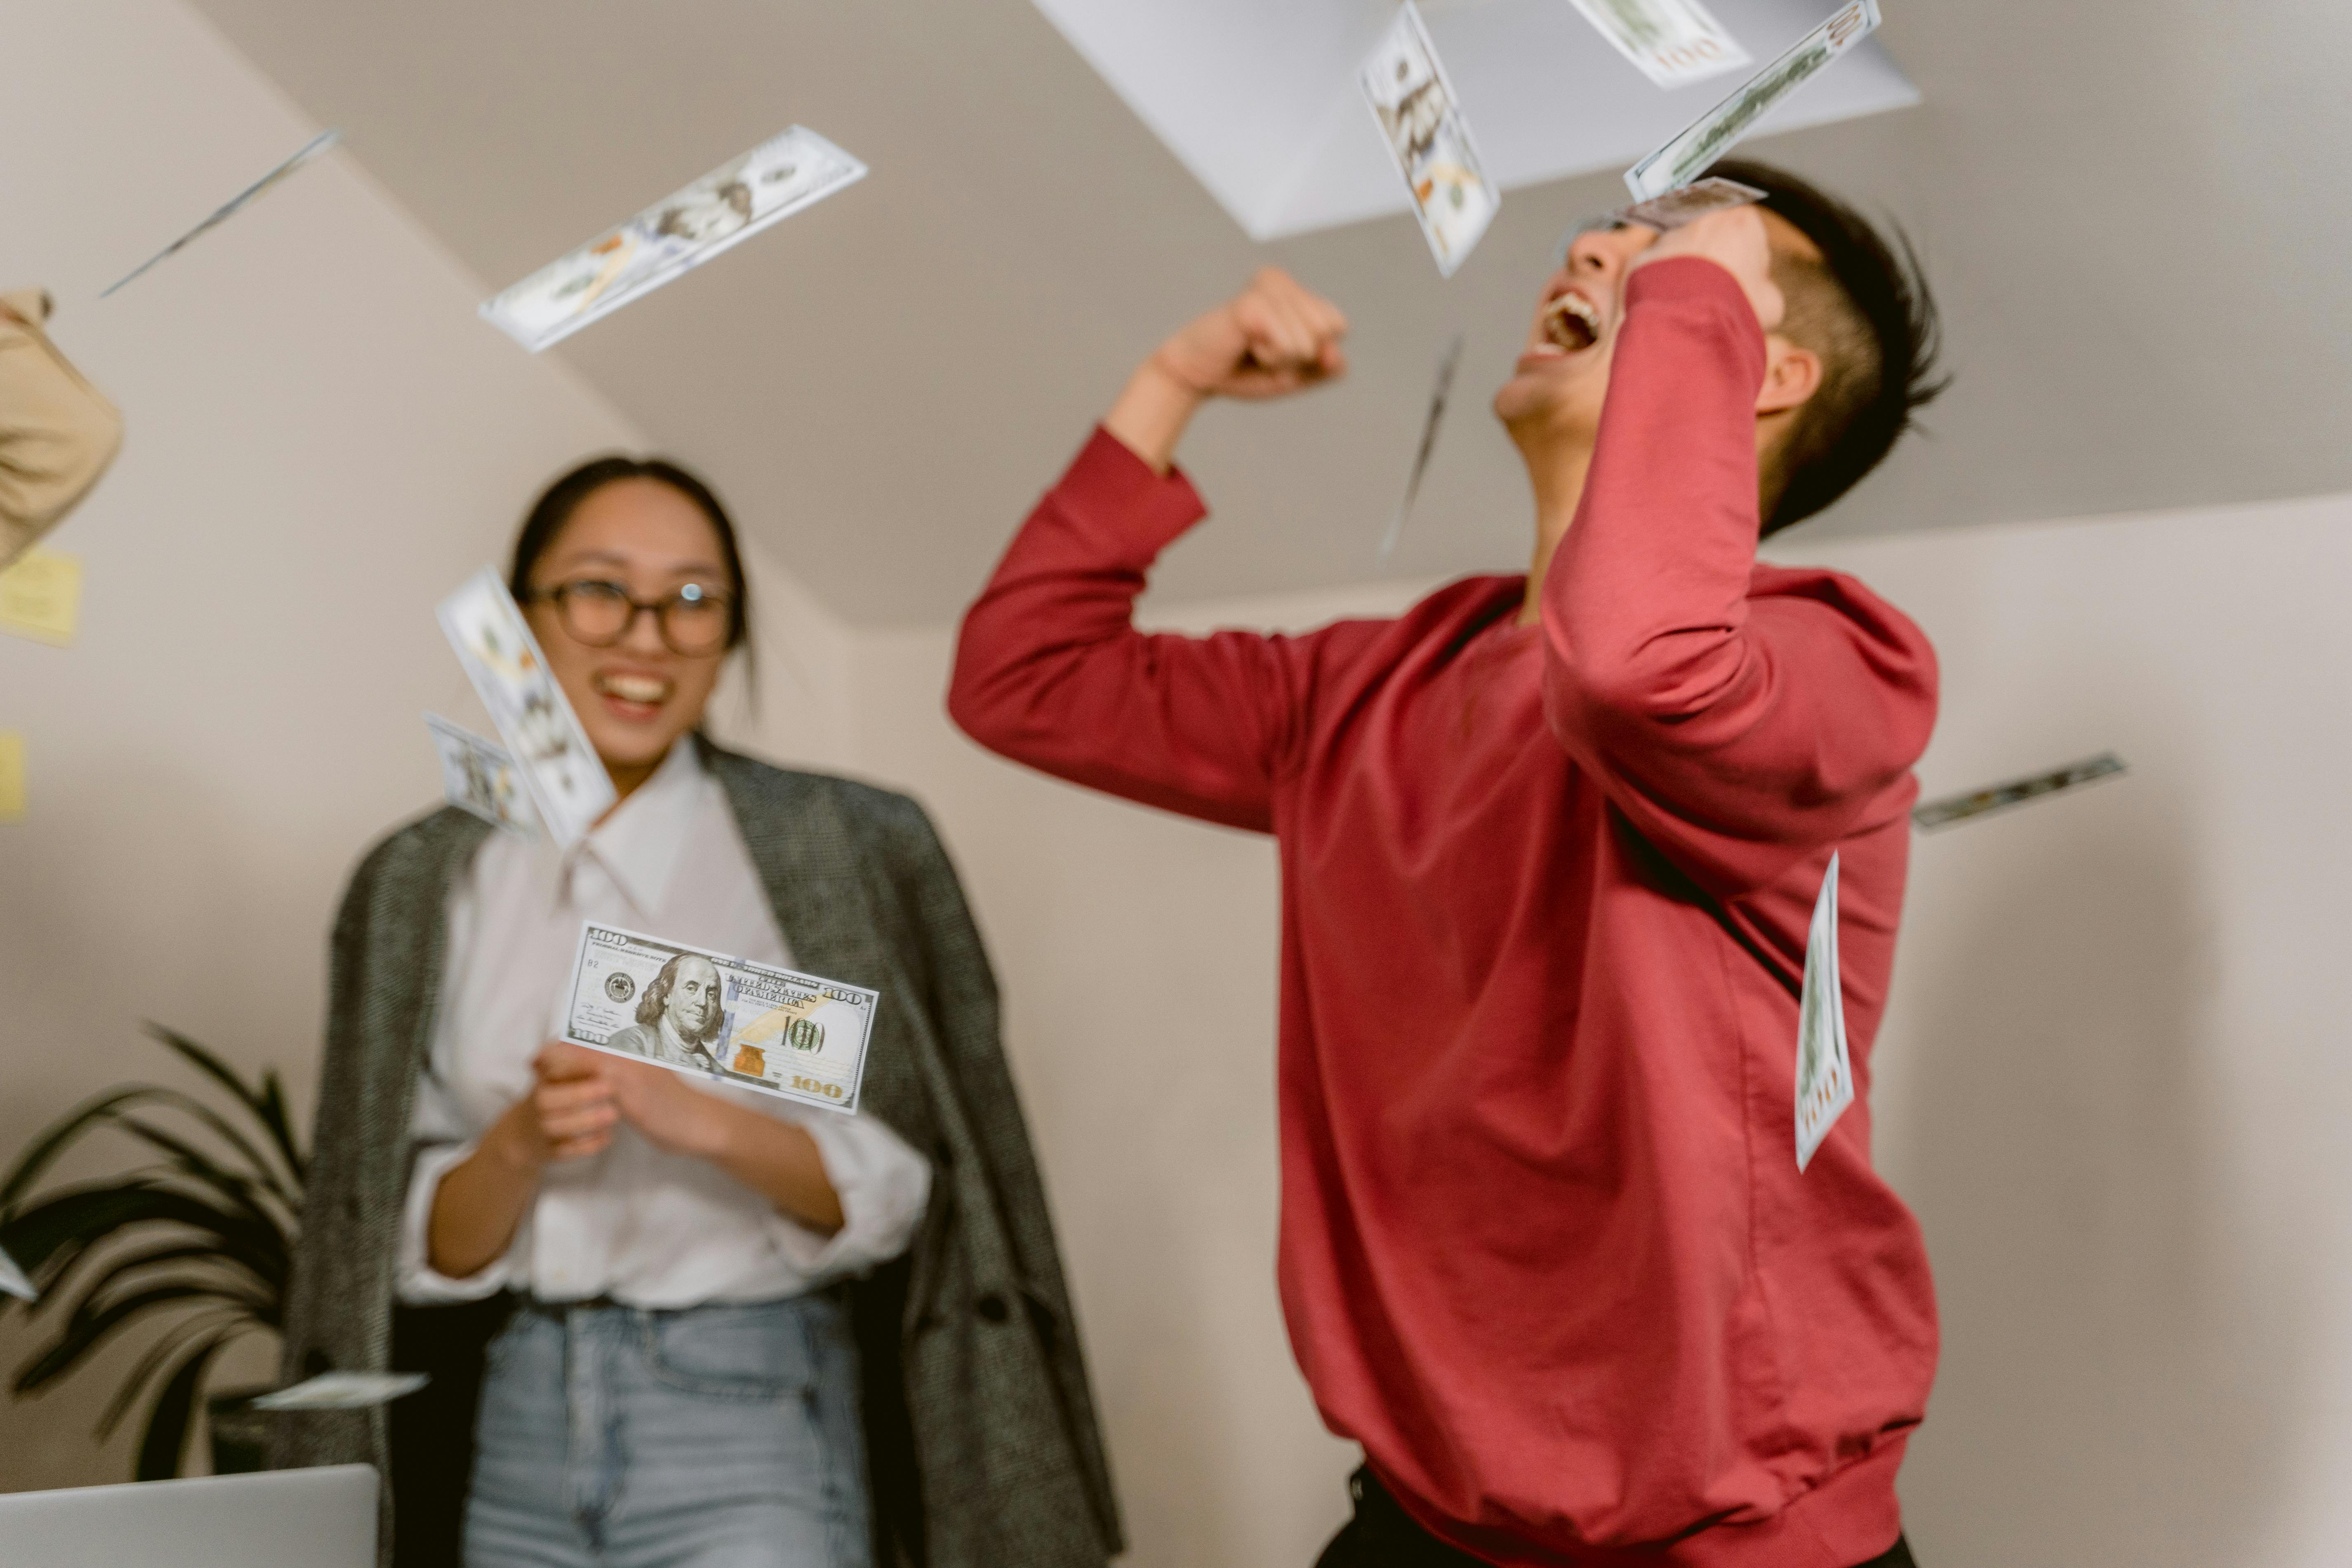 A woman watching a man celebrate by throwing money in the air | Source: Pexels